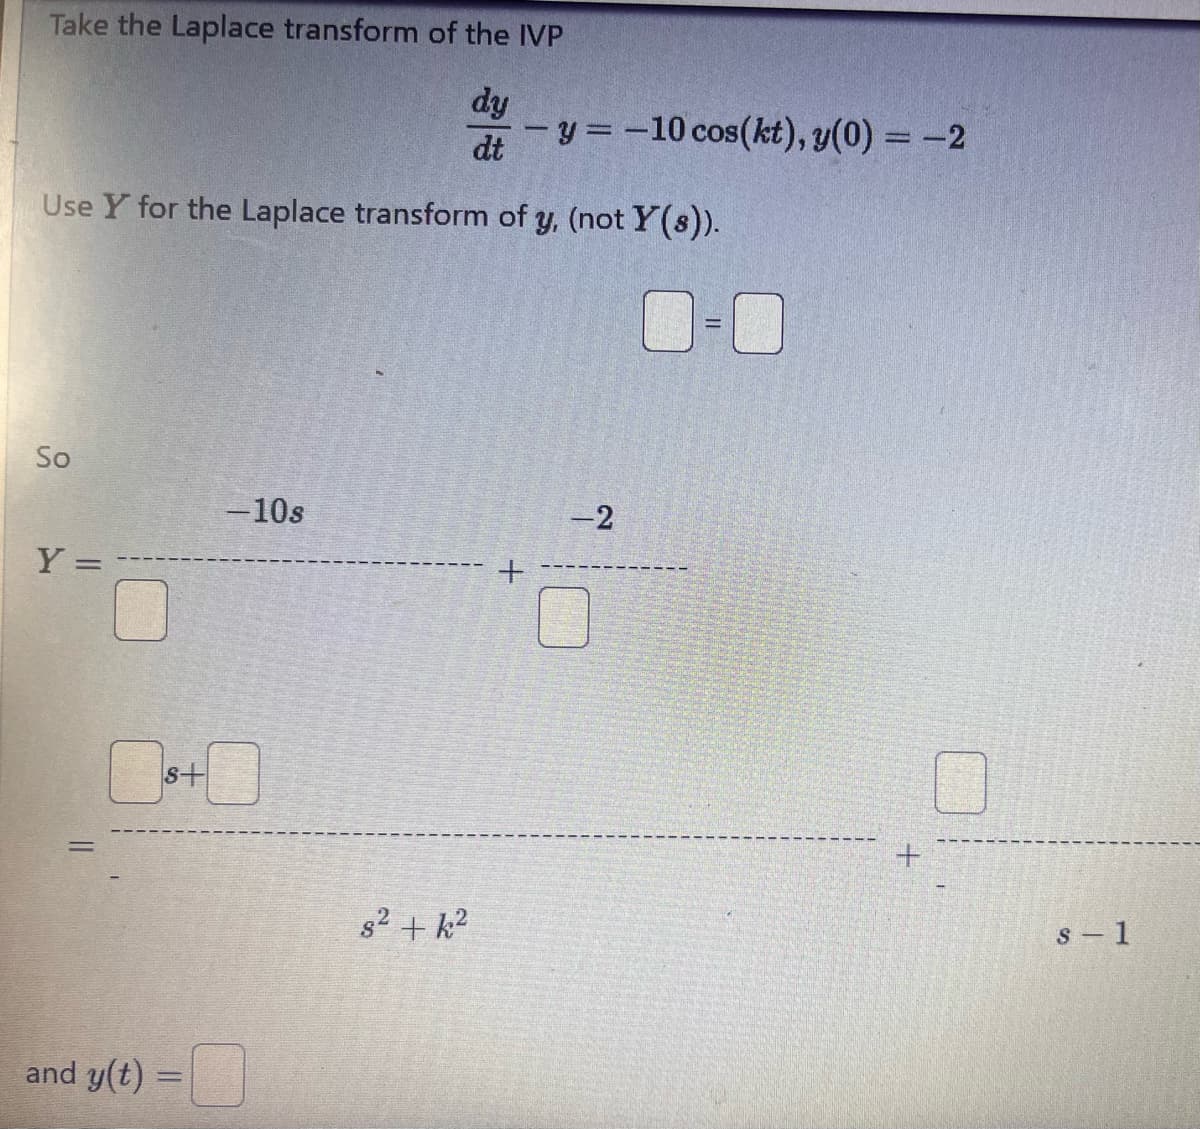 Take the Laplace transform of the IVP
dy
- y = -10 cos(kt), y(0) = -2
dt
Use Y for the Laplace transform of y, (not Y(s)).
So
-10s
Y:
=
===
☐ 8+0
and y(t) =
+
-2
82+k2
+
s-1